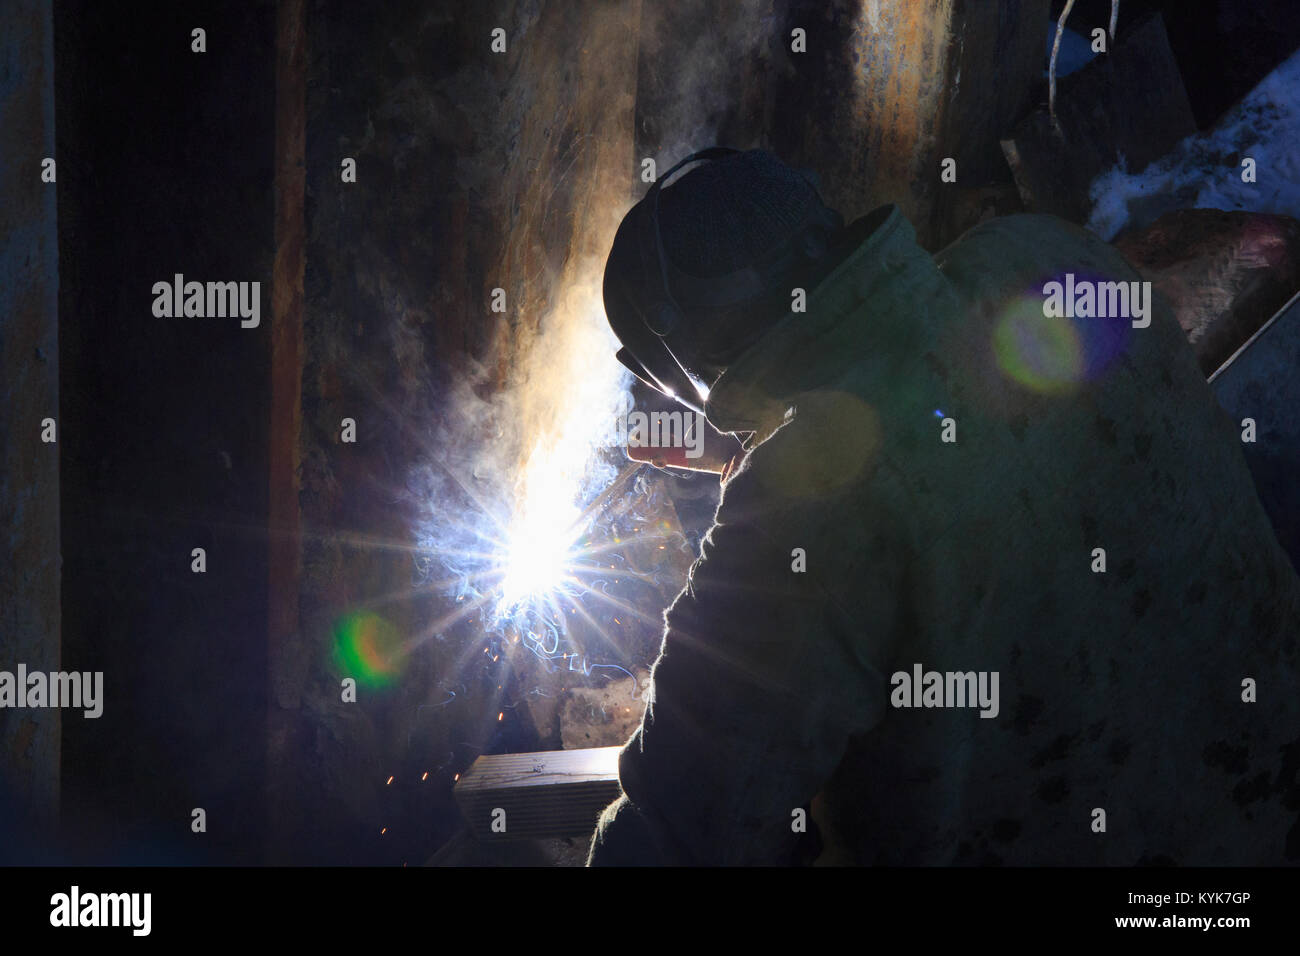 Welder from the back, in backlight from electric welding. Stock Photo